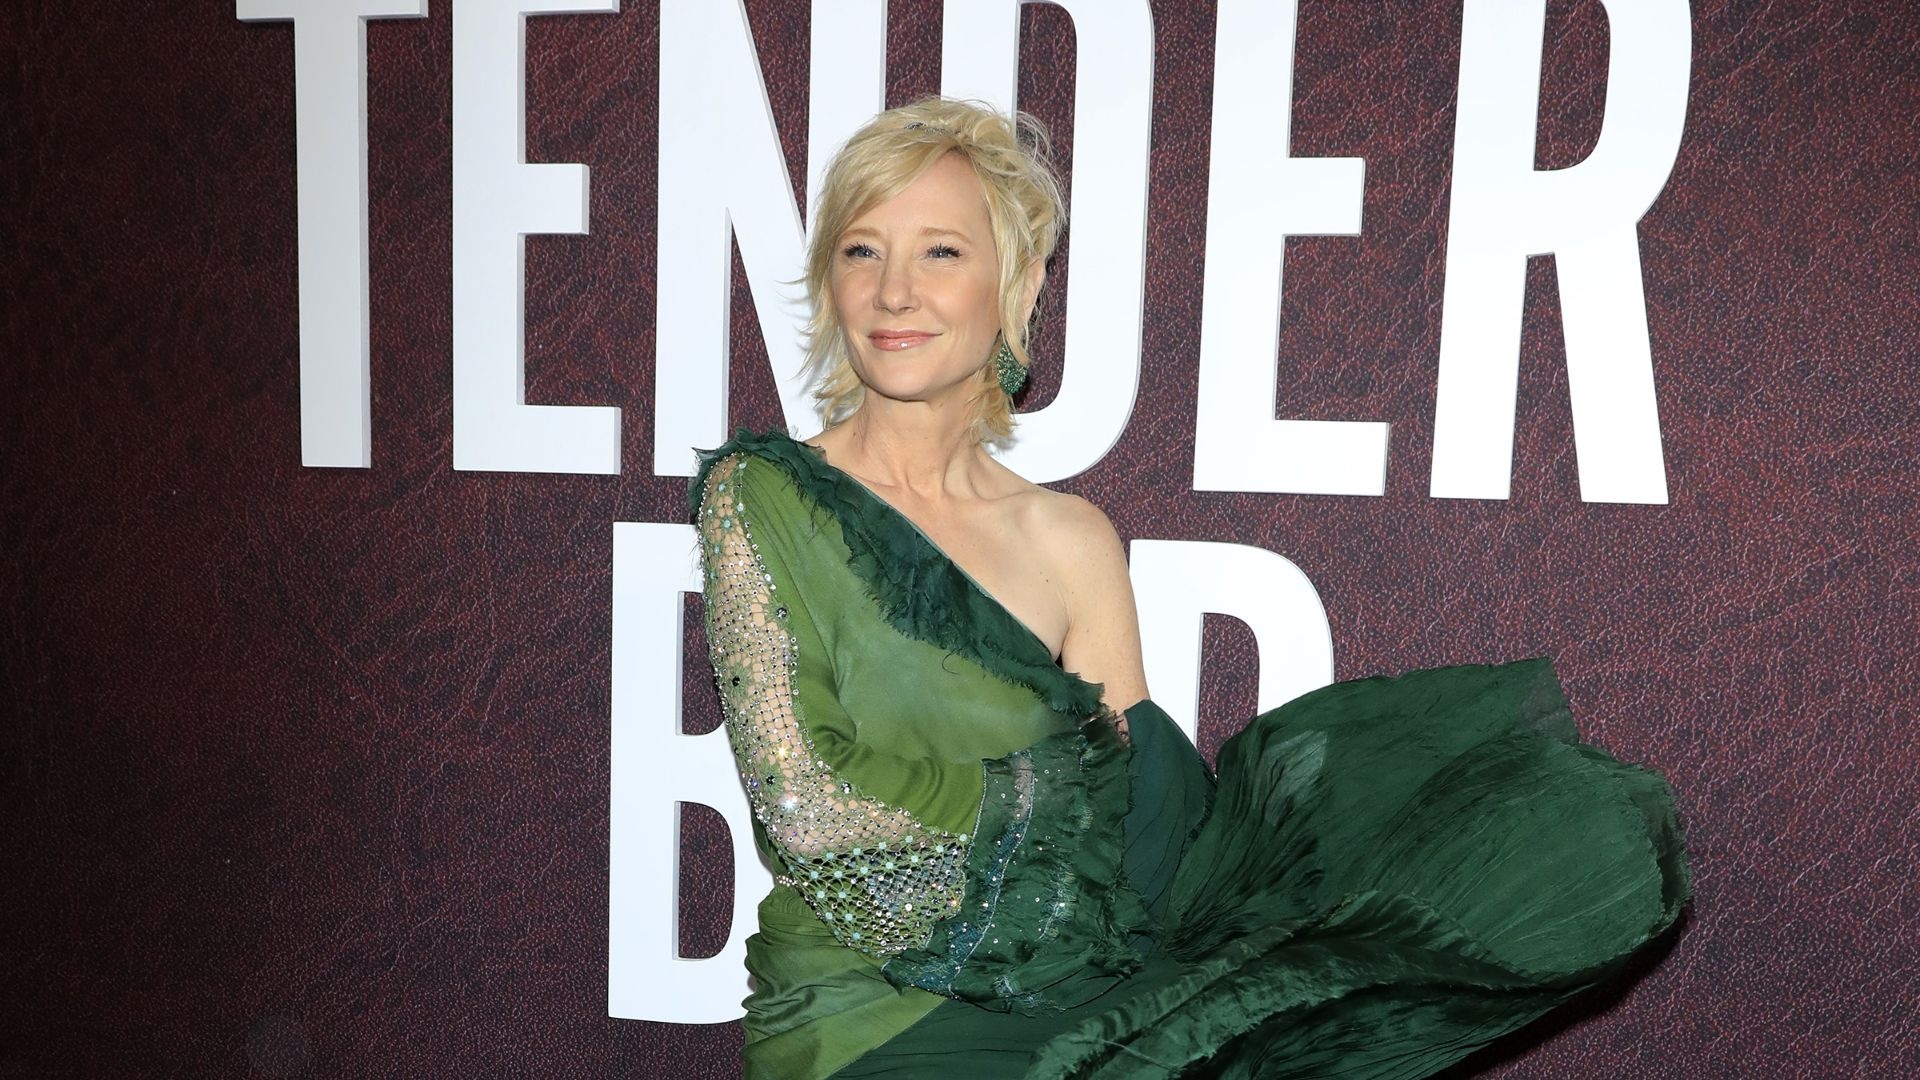 Anne Heche between life and death: She wasn't doing very; - Buzznews 1920x1080